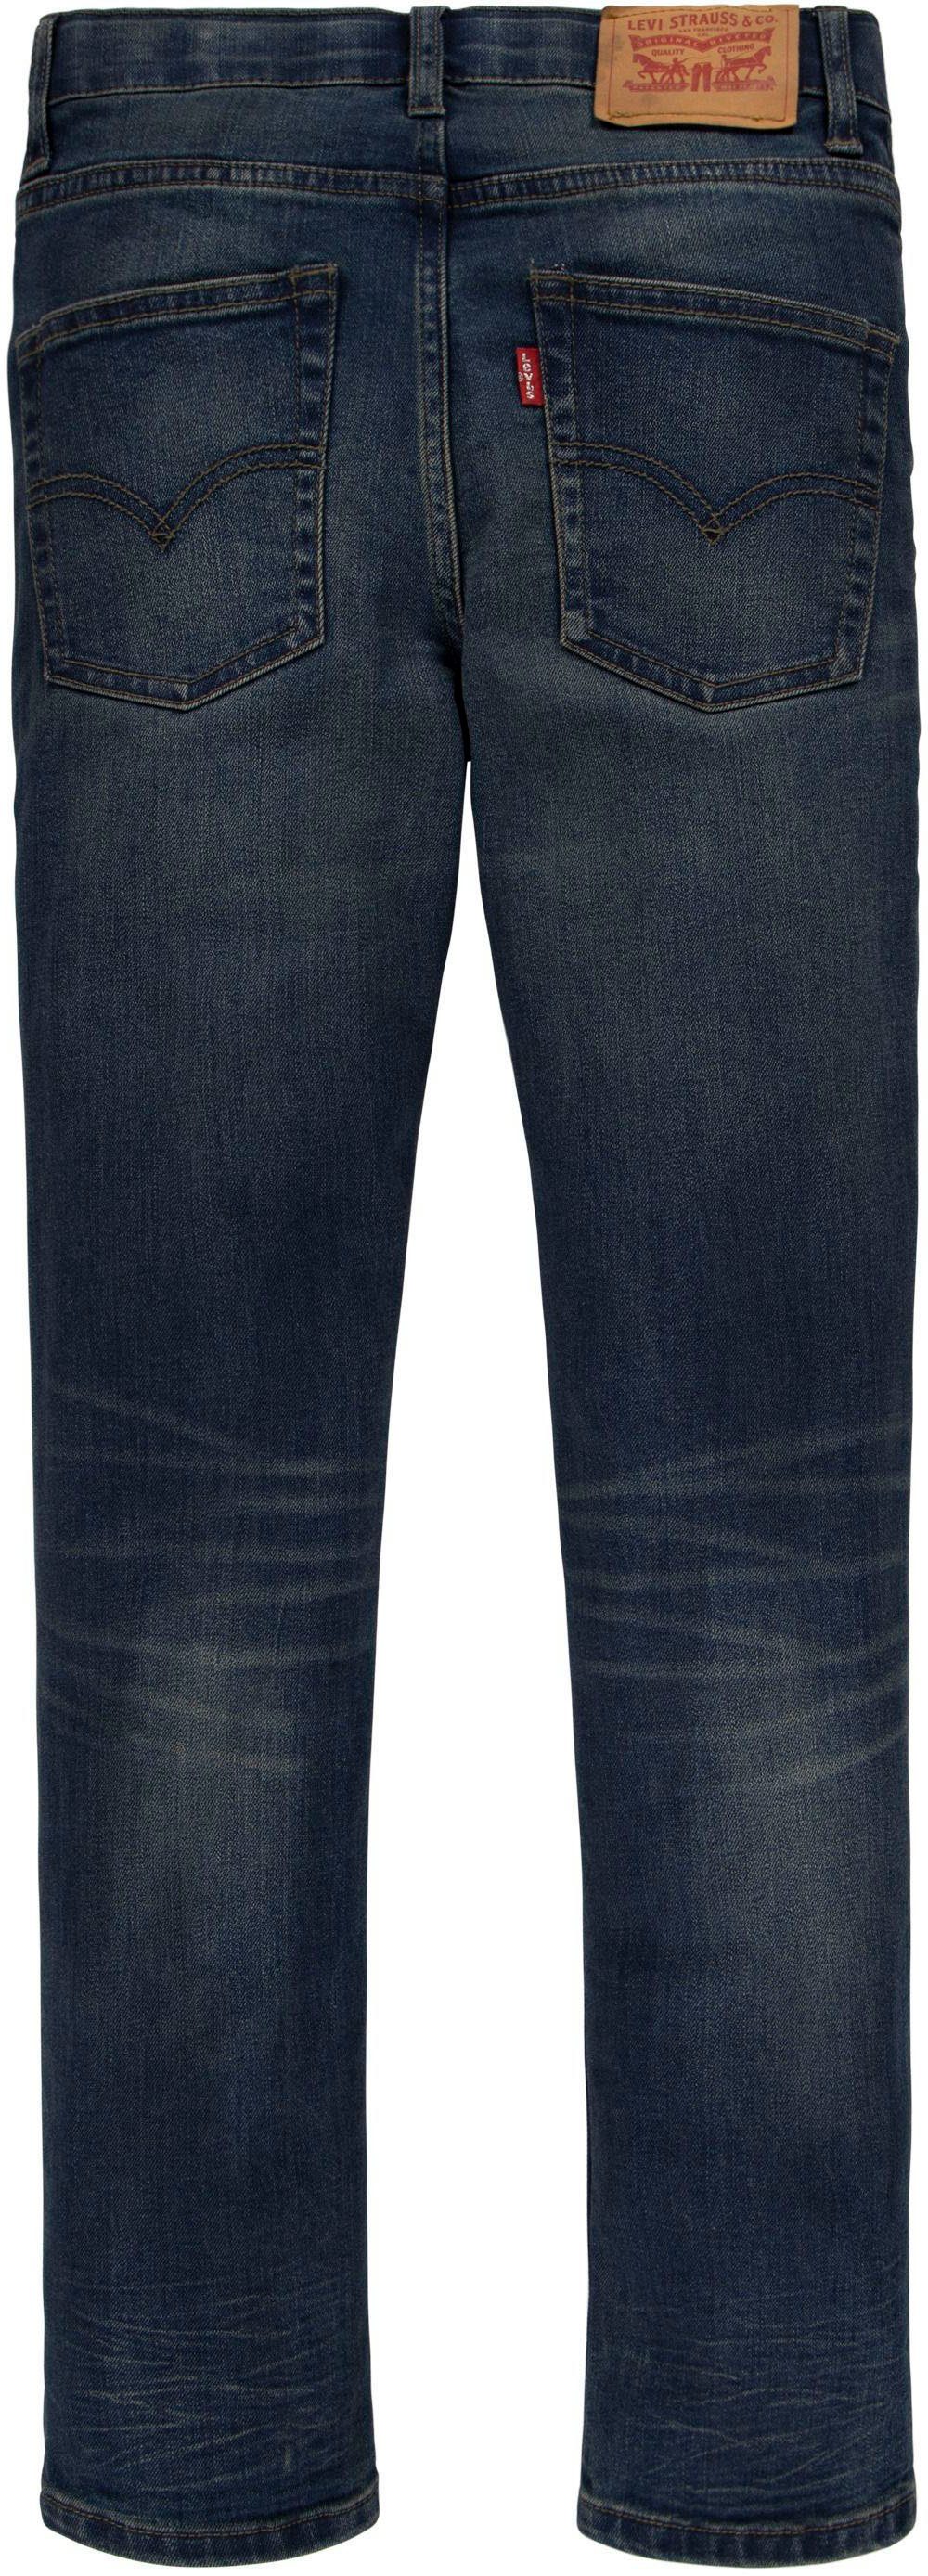 BOYS FIT JEANS mixed Kids Skinny-fit-Jeans SKINNY tape for 510 Levi's®